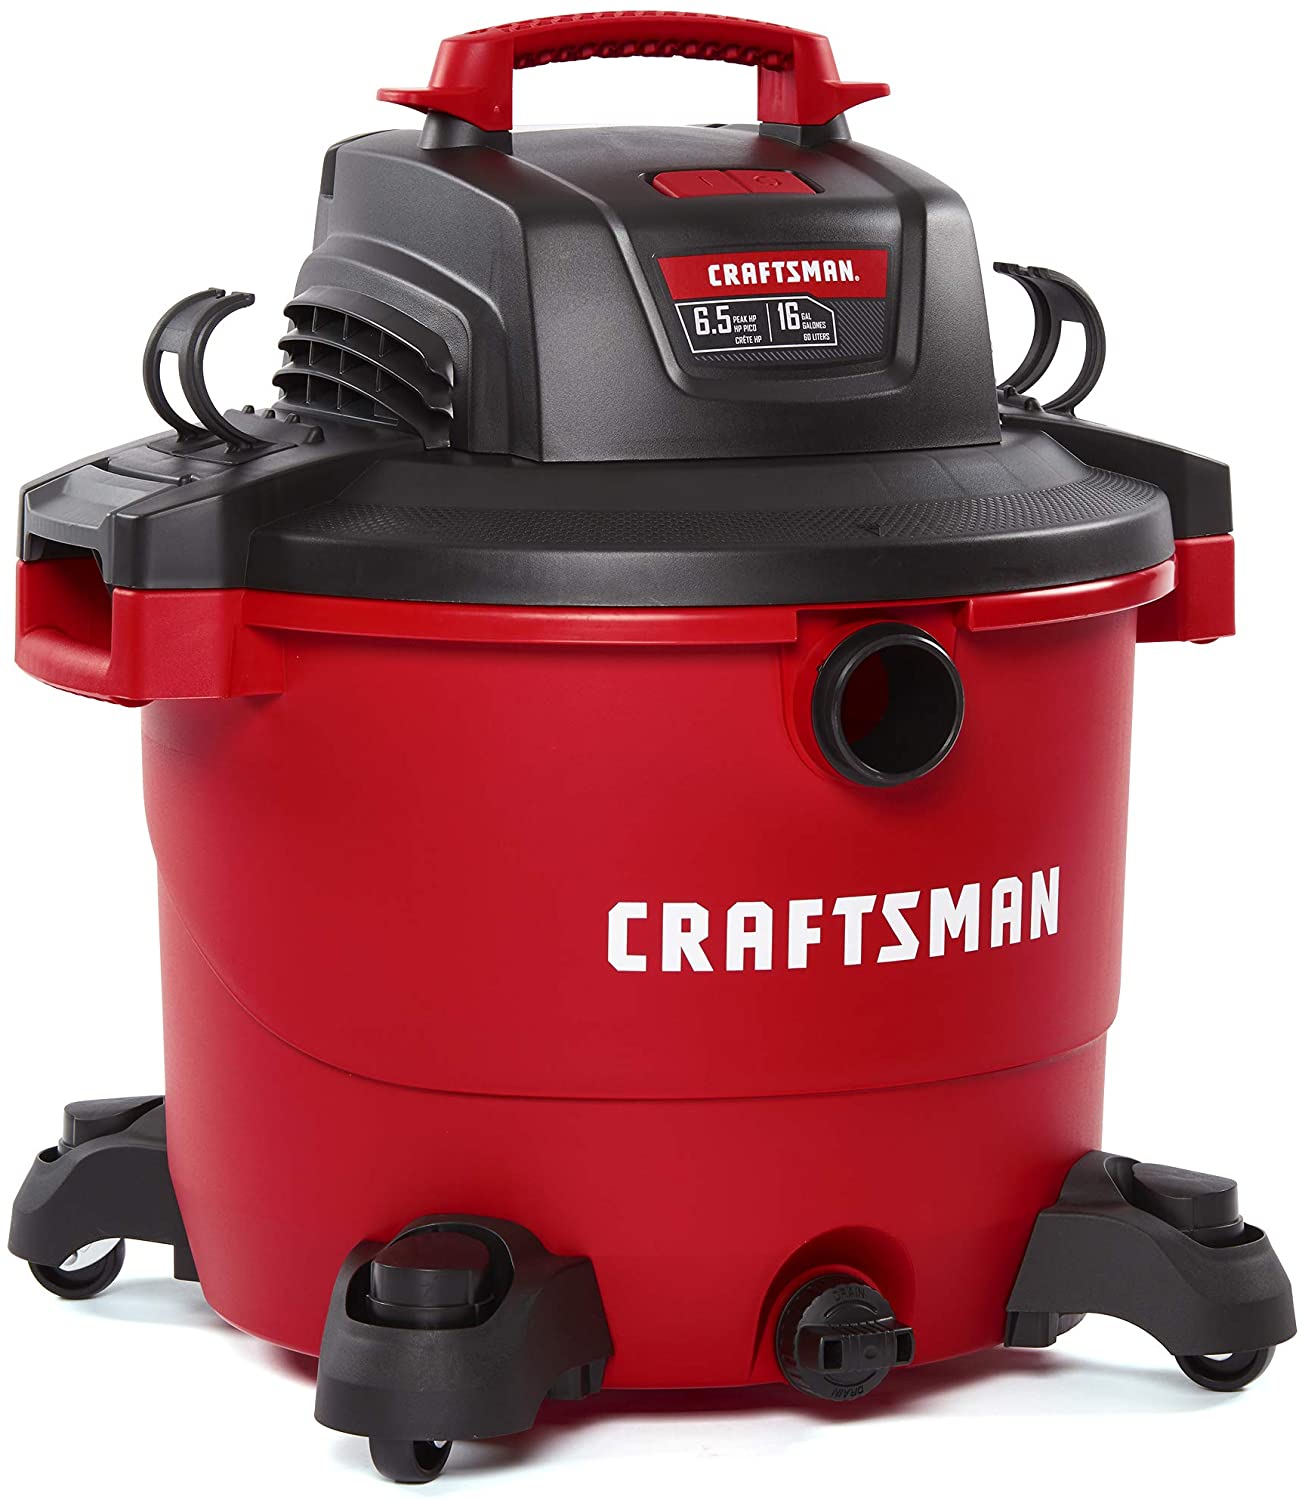 Craftsman CMXEVBE17595 16 Gallon 6.5 Peak HP Wet/Dry Vac, Heavy-Duty Shop Vacuum with Attachments - image 1 of 4